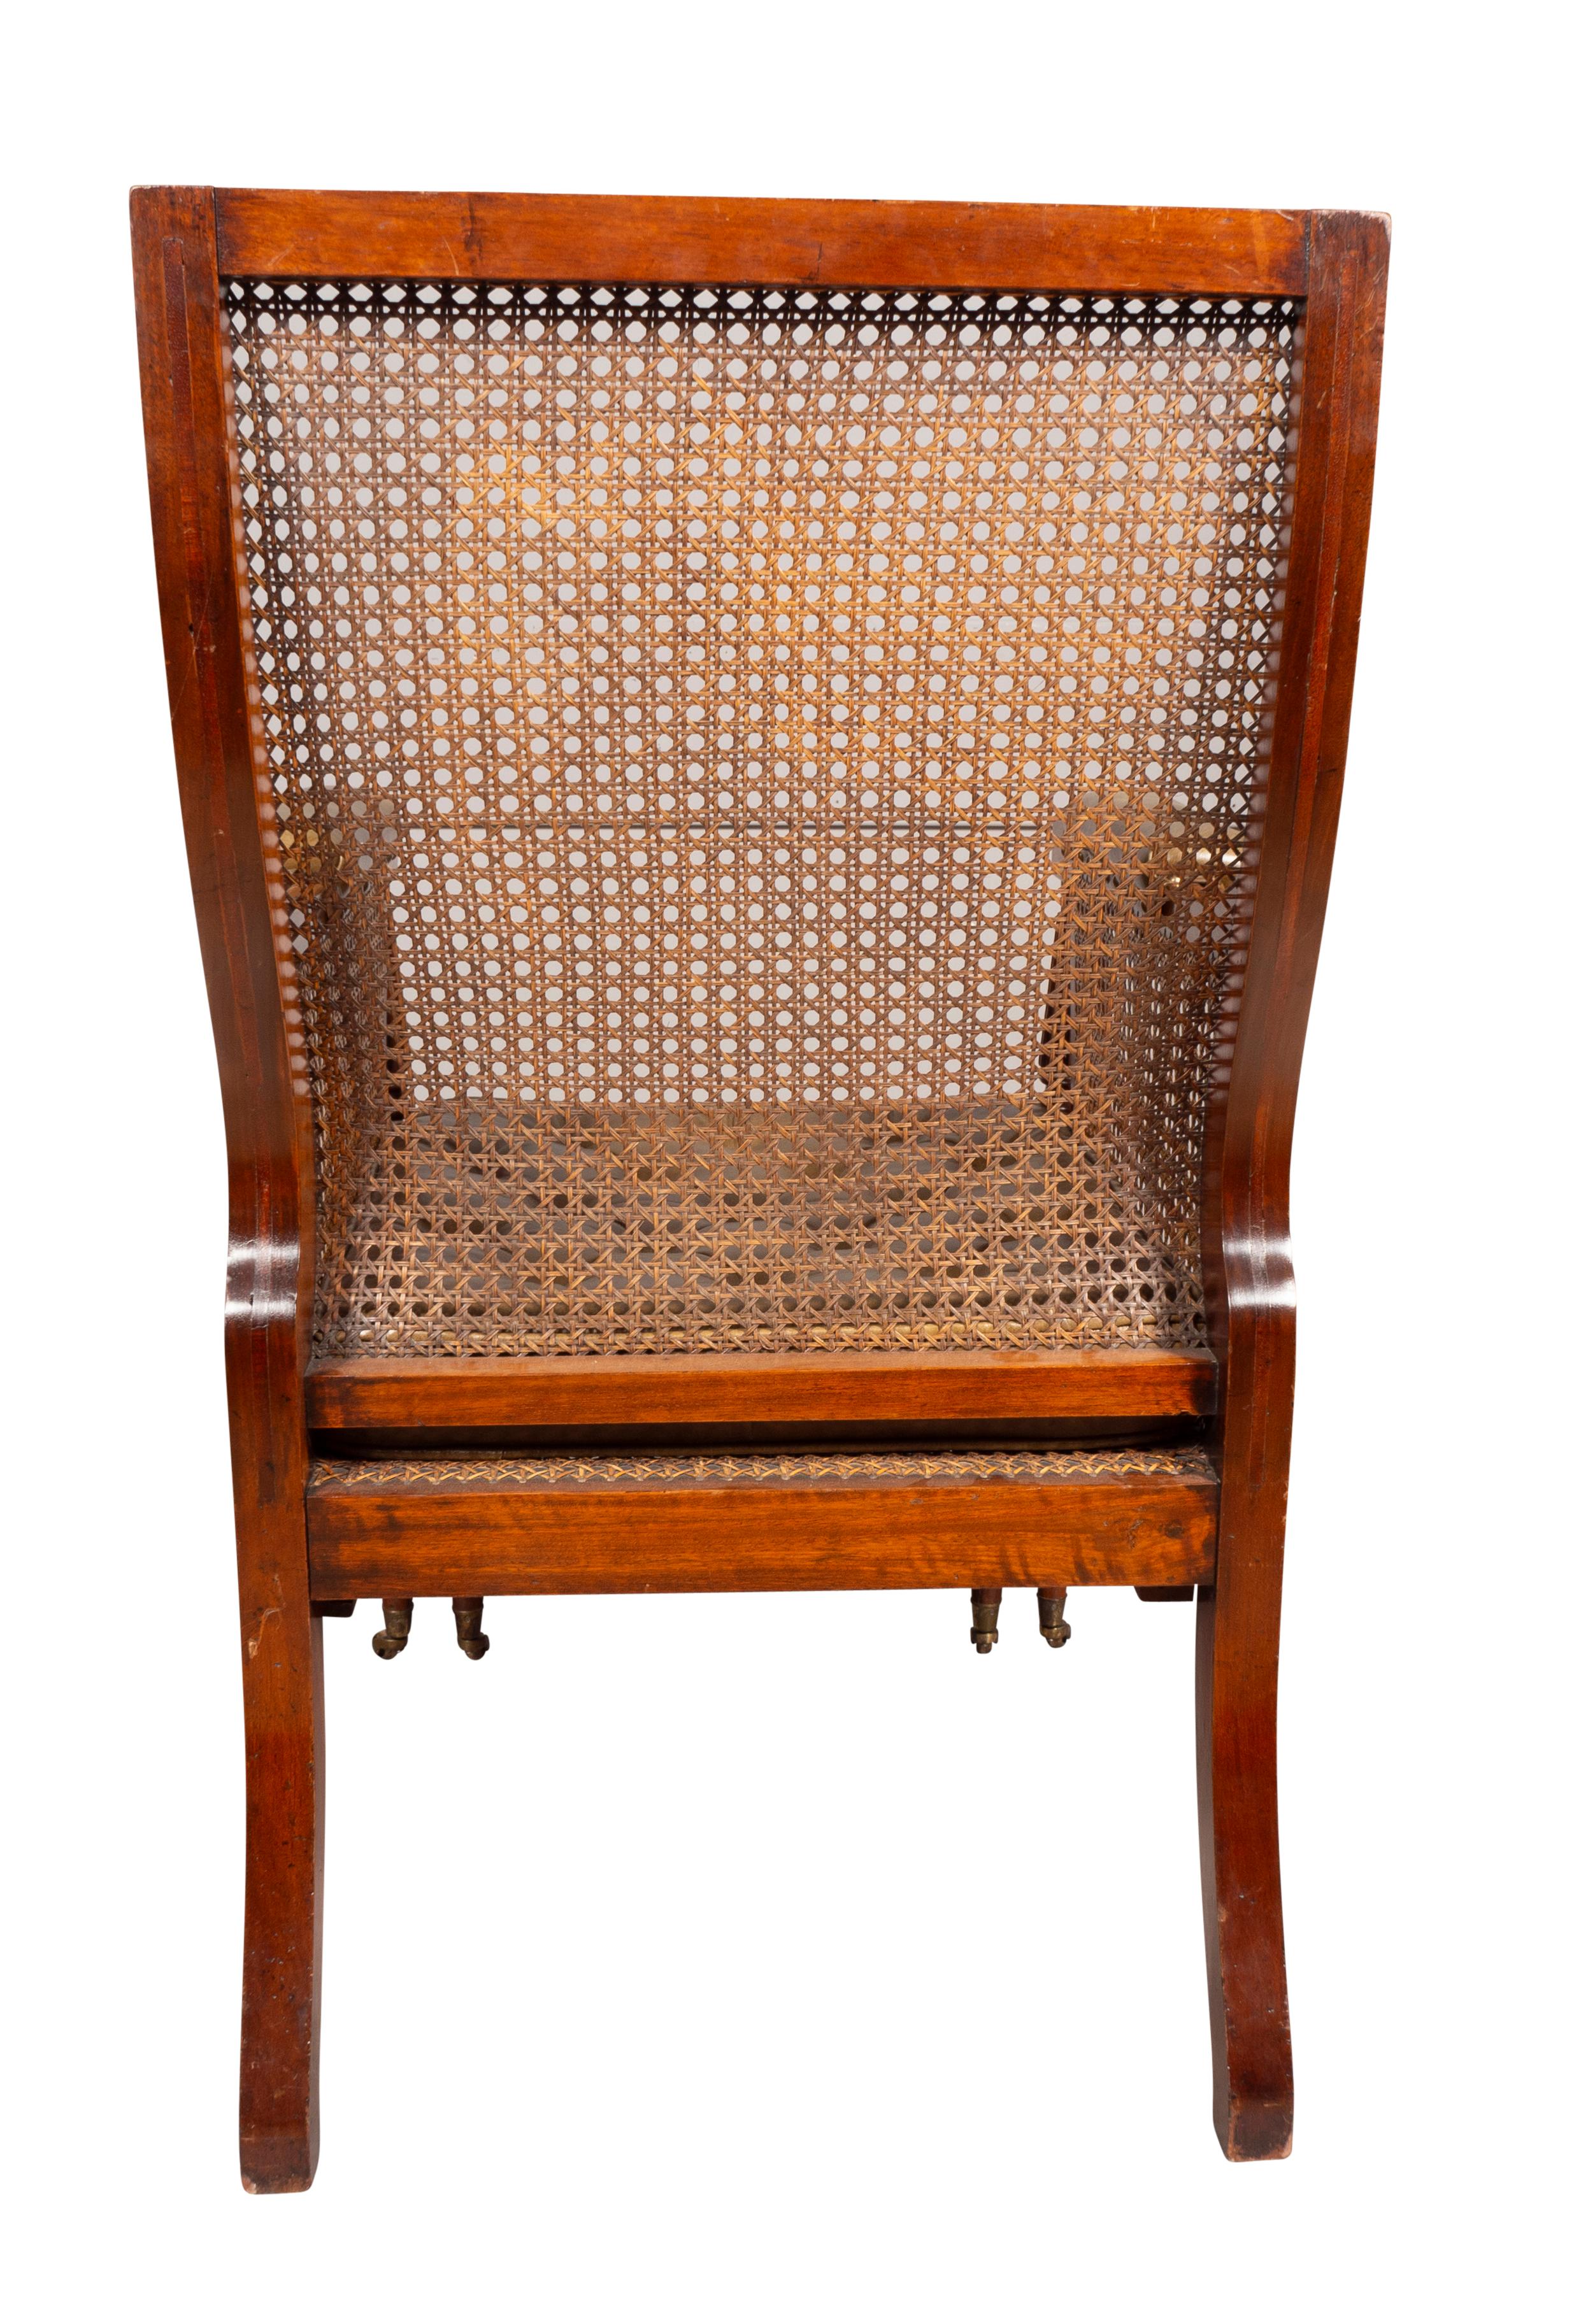 Regency Mahogany Caned Bergere And Ottoman In Good Condition For Sale In Essex, MA